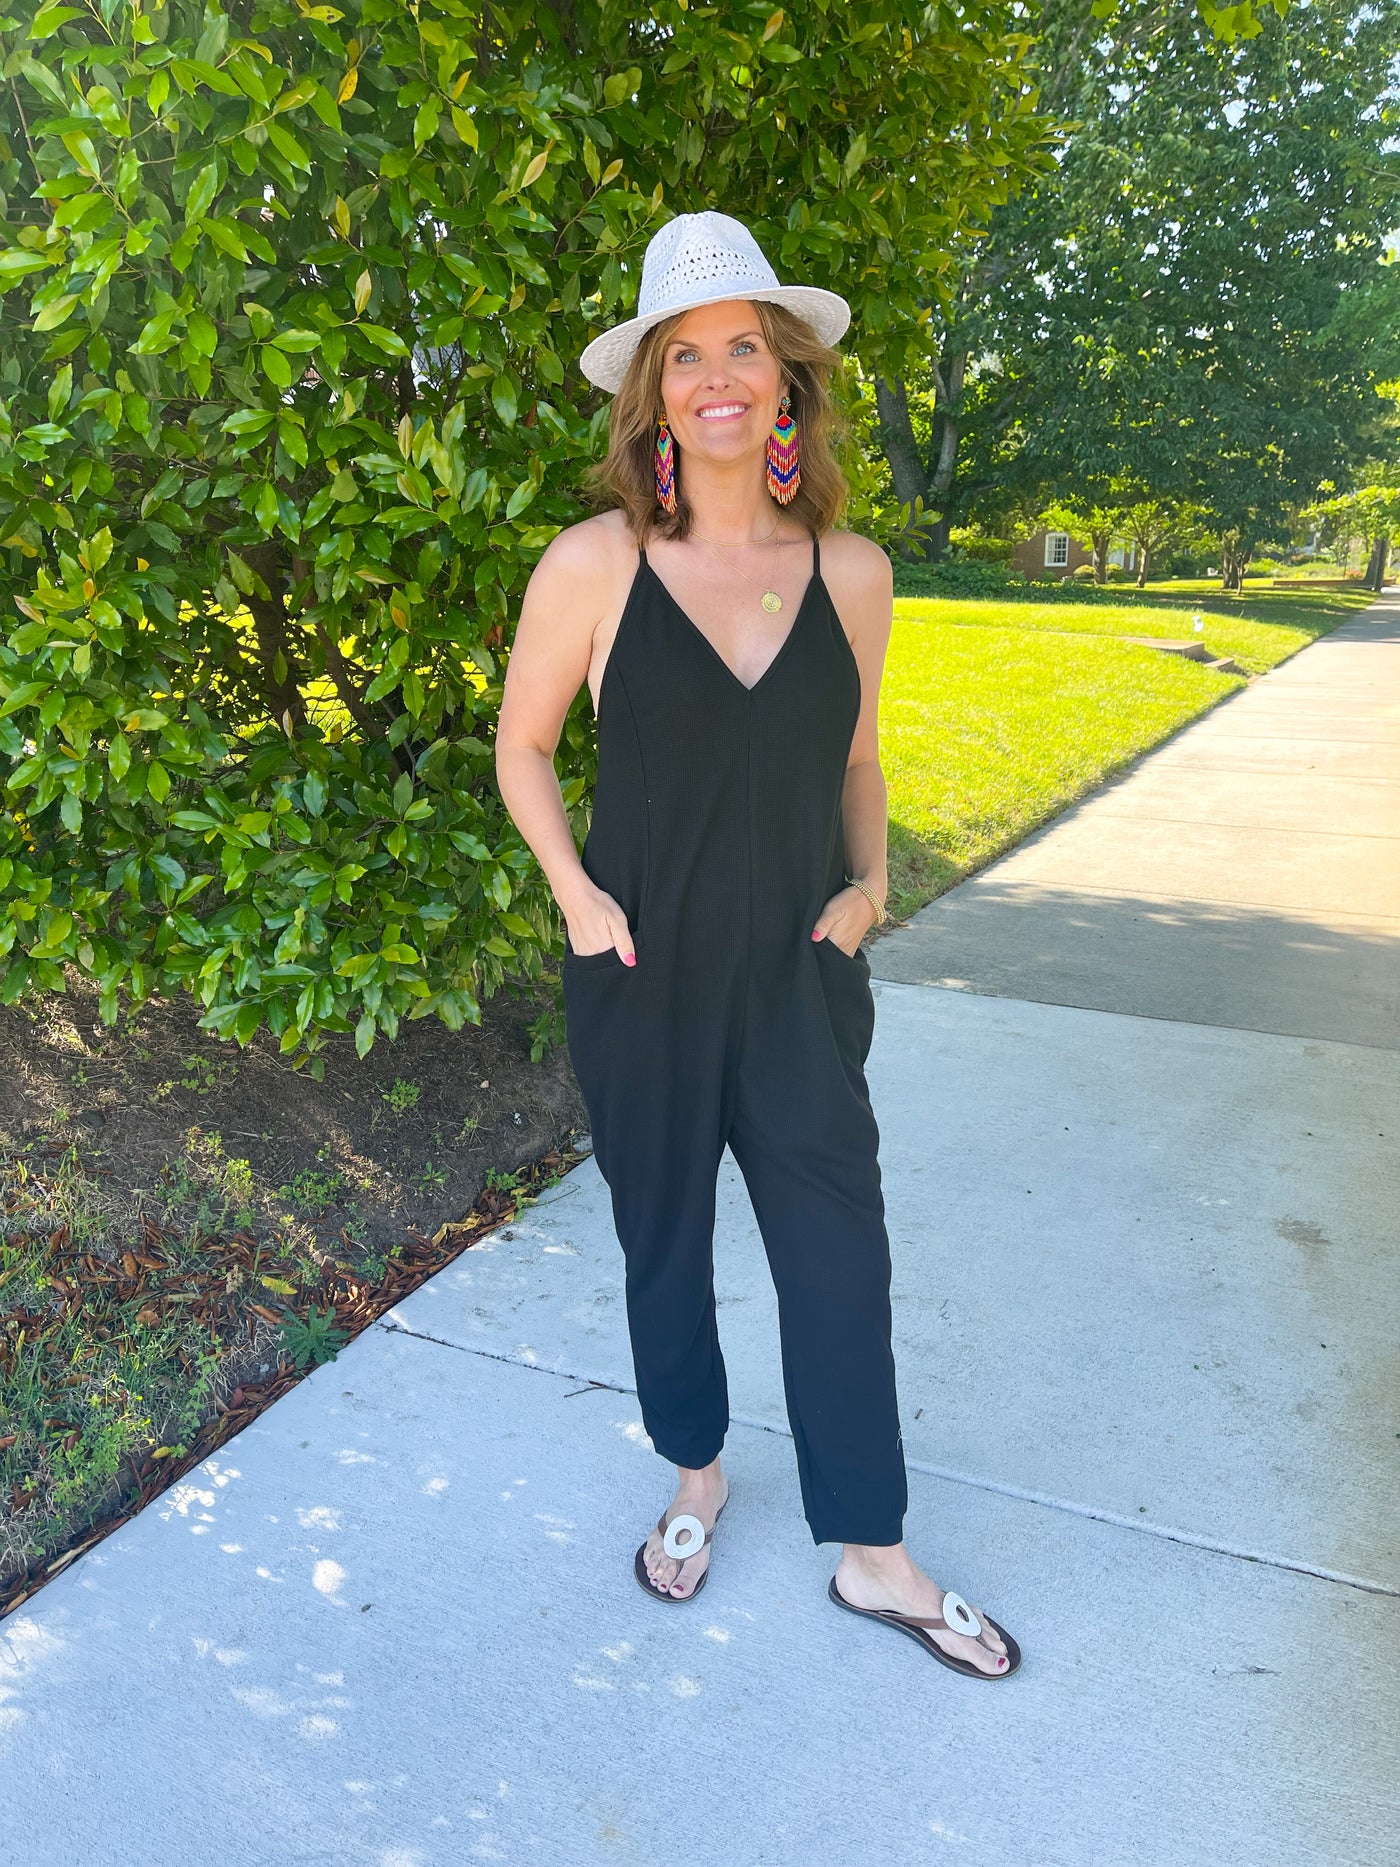 The Motown Song V-Neck Jumpsuit